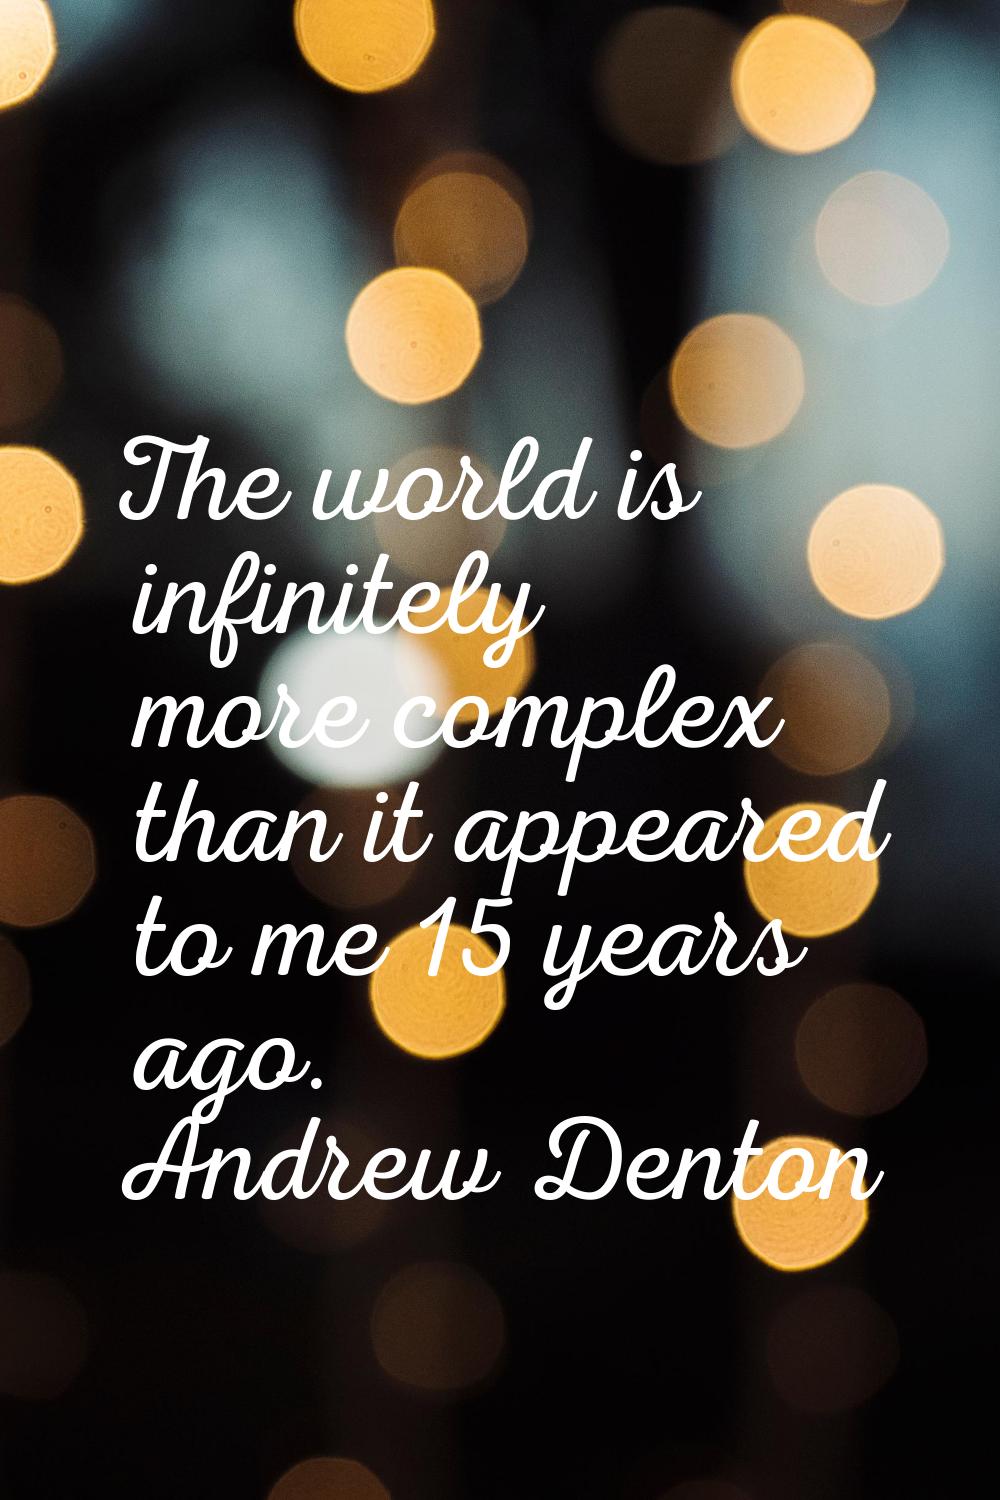 The world is infinitely more complex than it appeared to me 15 years ago.